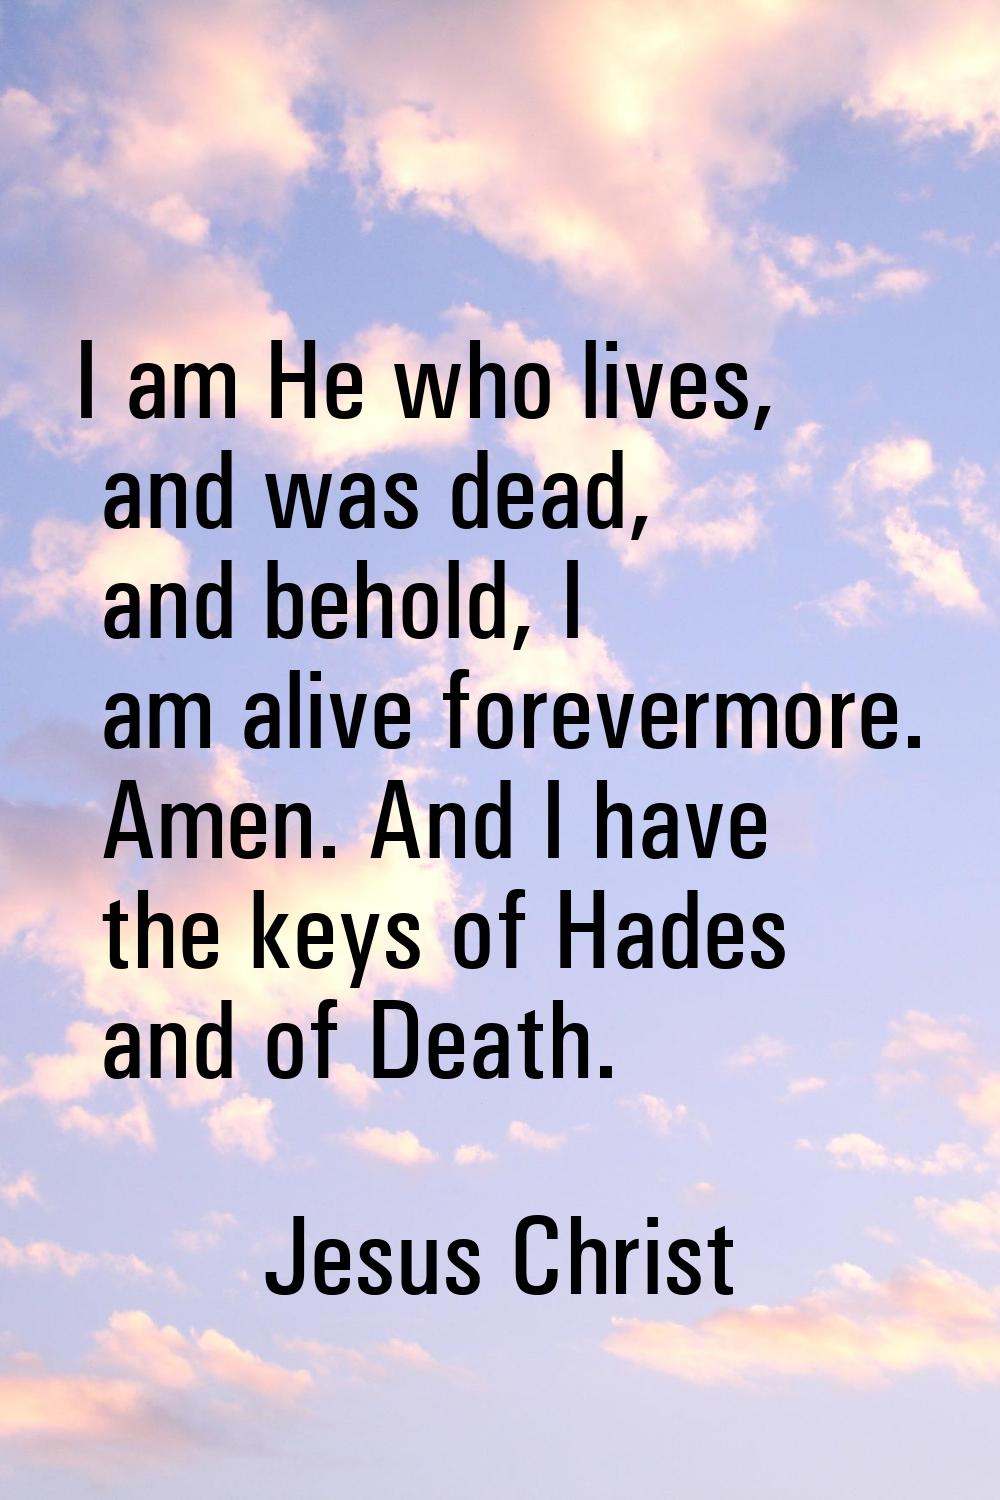 I am He who lives, and was dead, and behold, I am alive forevermore. Amen. And I have the keys of H